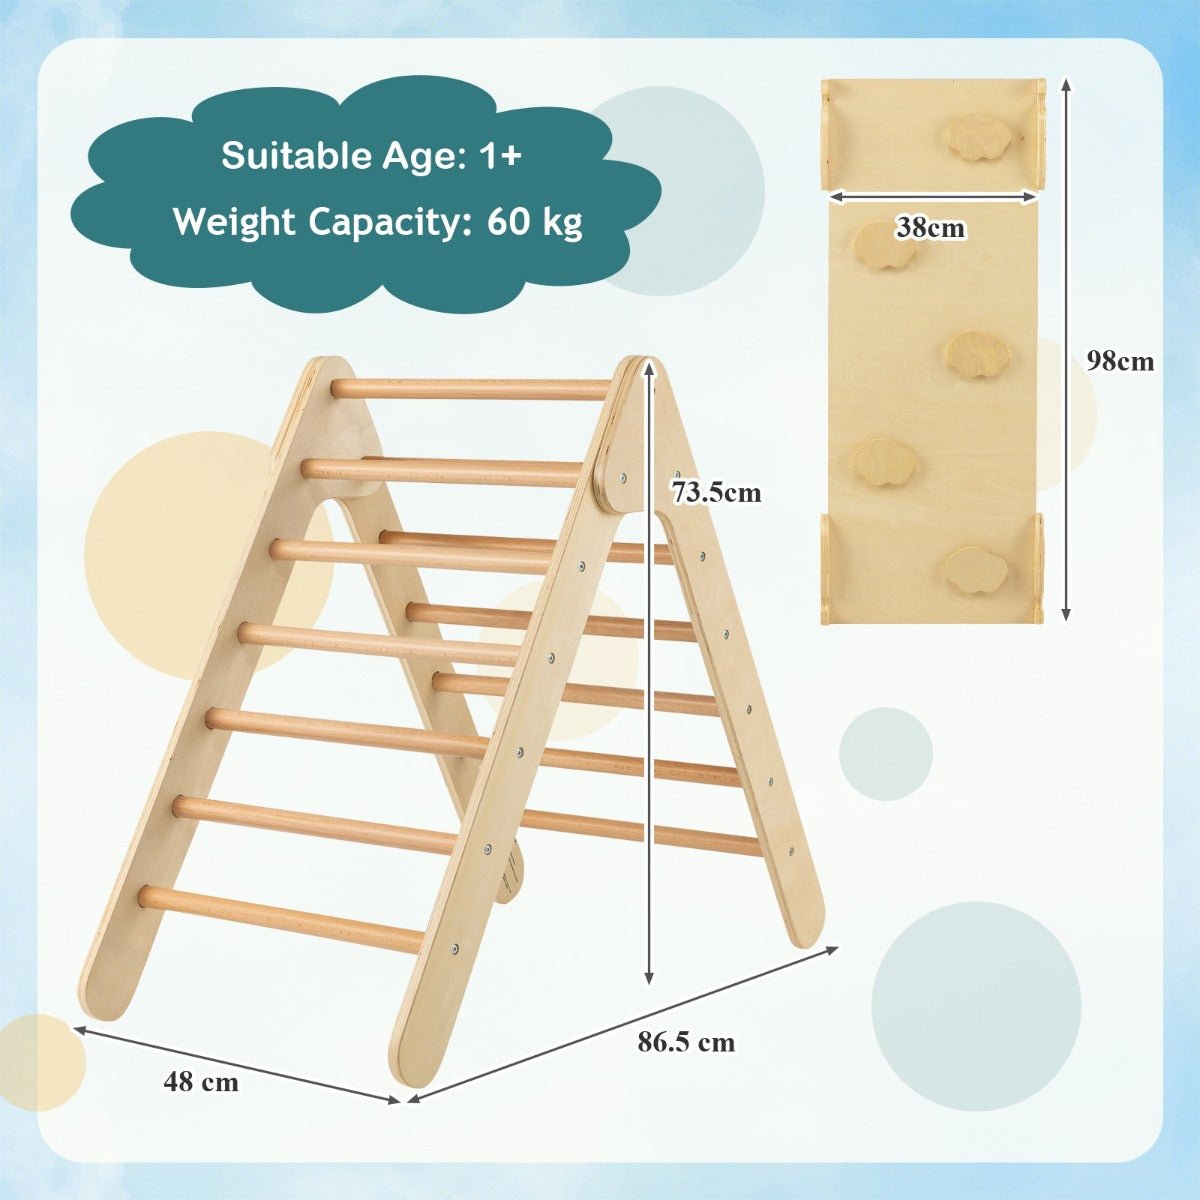 Growing Through Play: 3-in-1 Wooden Climbing Triangle and Slide, Natural